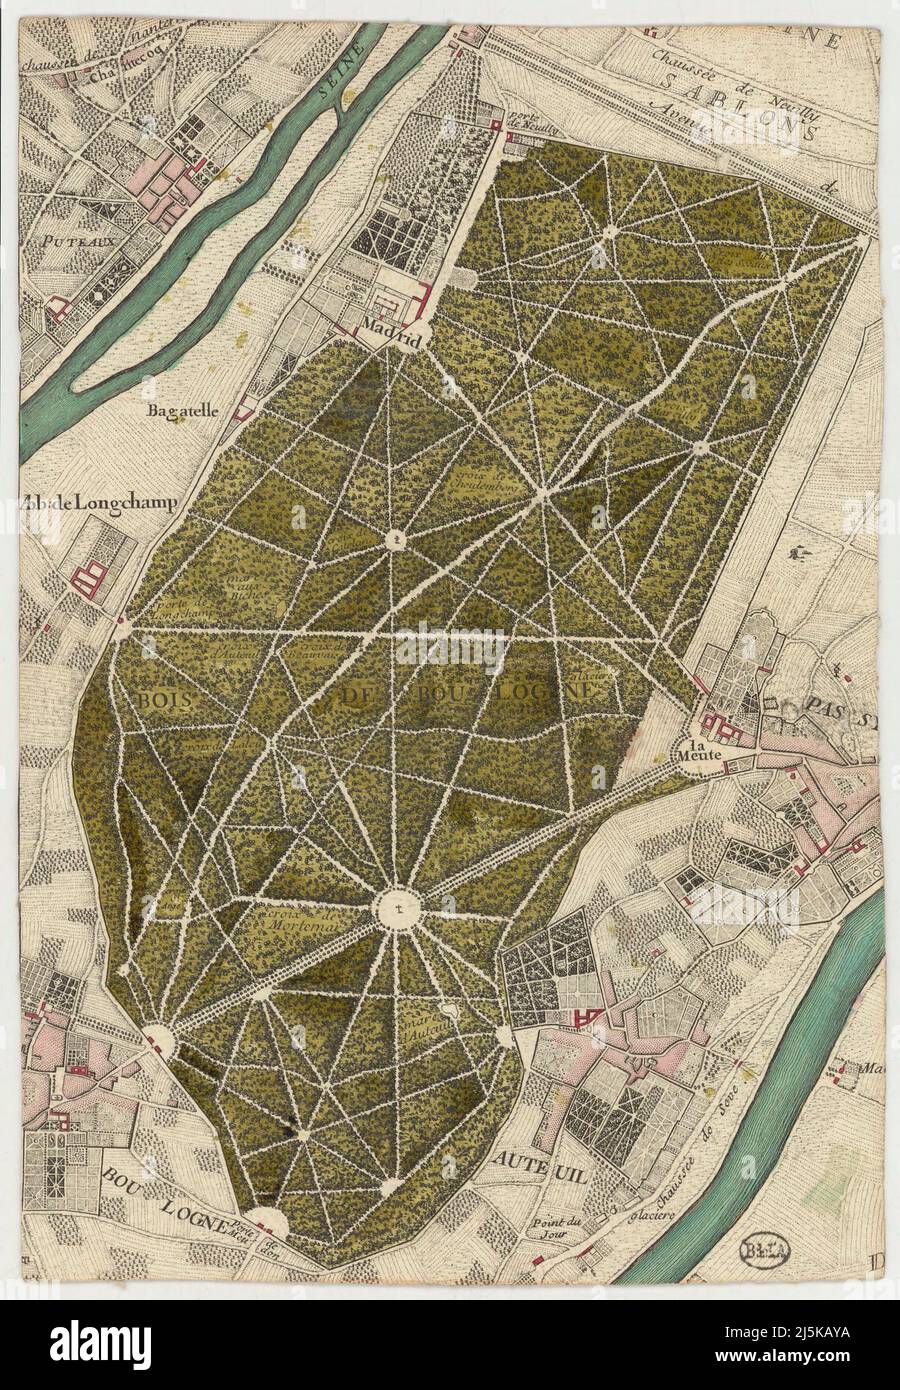 Vintage map of Paris and area around it from 17th/18th century. Maps are beautifully hand illustrated and engraved showing Paris at the time. Stock Photo